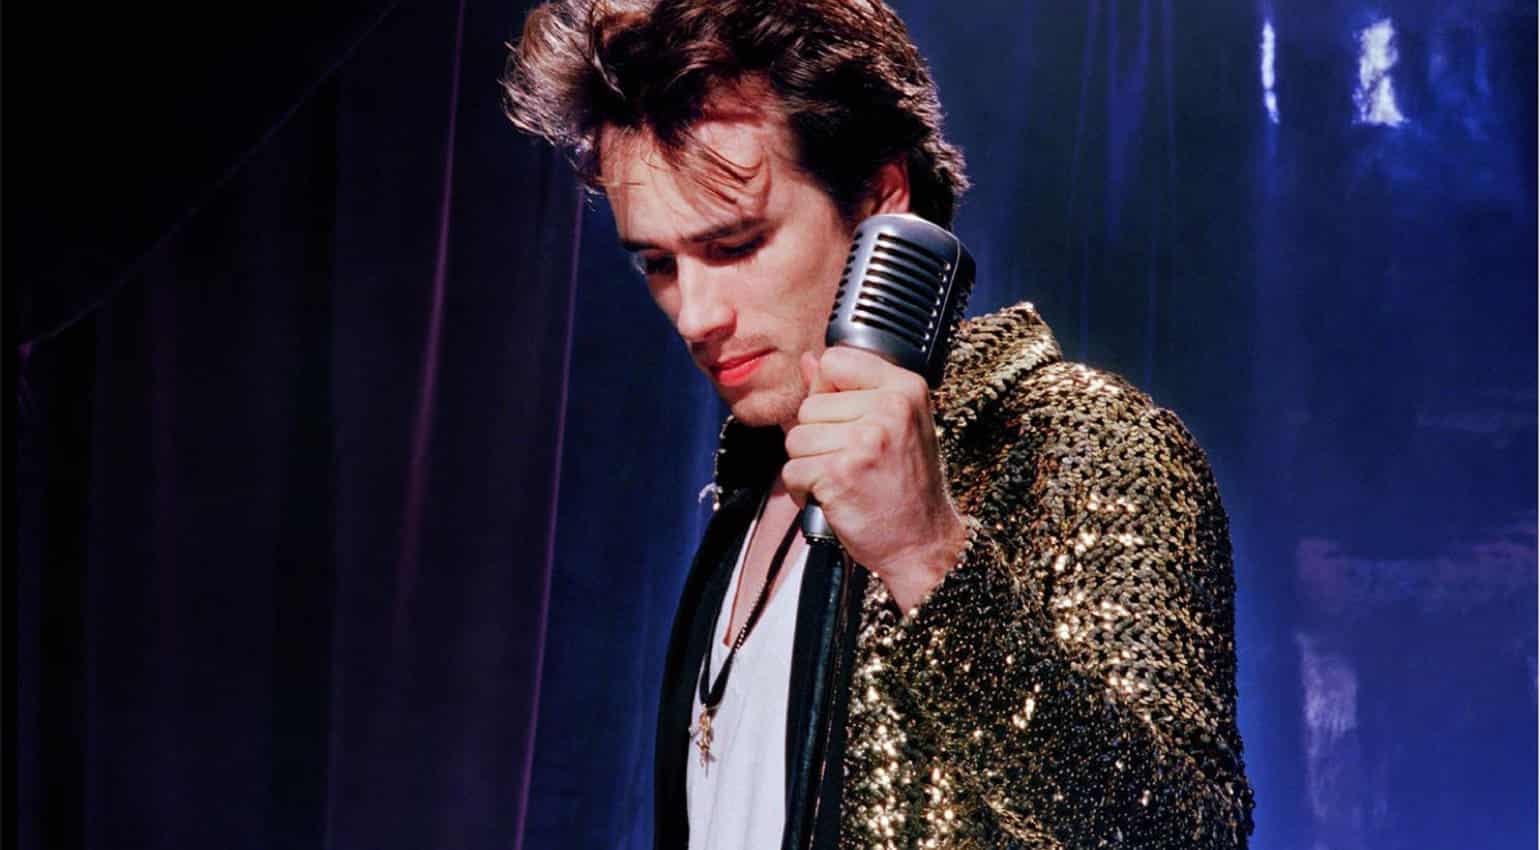 Jeff Buckley was a major influence on many musicians and guitarists. We take a deep dive into the guitar equipment he used.